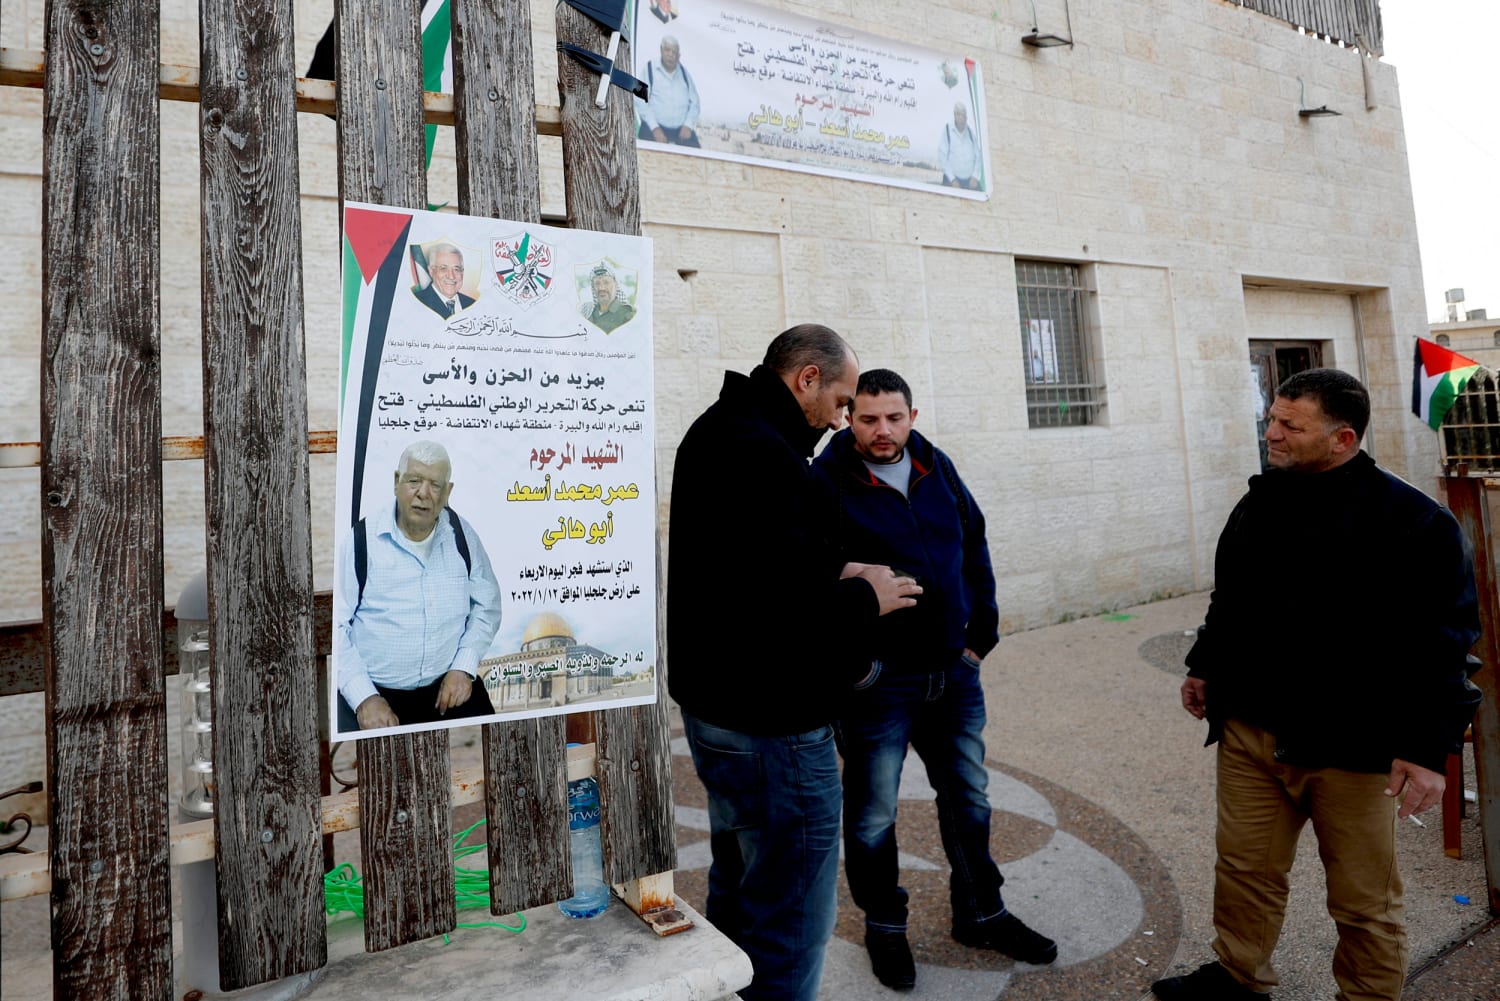 Elderly Palestinian American man dies after being detained by Israeli forces